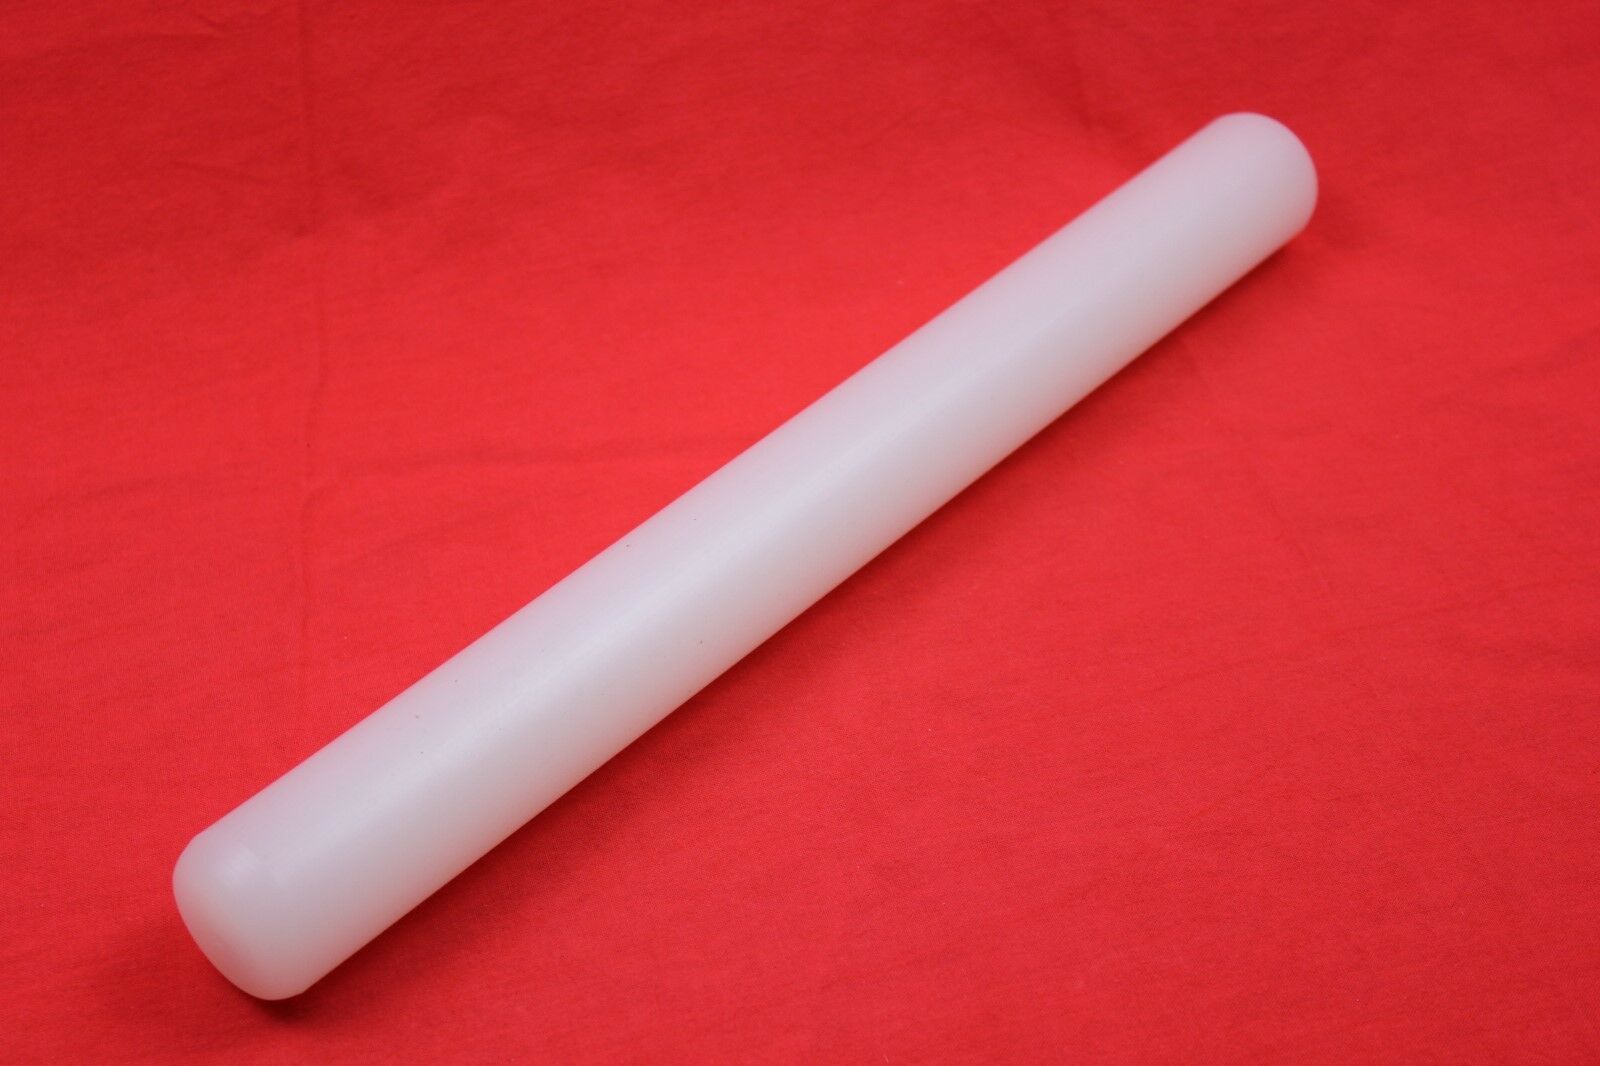 attachment-https://www.cupcakeaddicts.co.uk/wp-content/uploads/imported/7/Variation-of-Plastic-Rolling-Pin-8-Various-sizes-Cake-Pastry-UK-SELLER-Same-day-dispatch-323097813287-360d.jpg